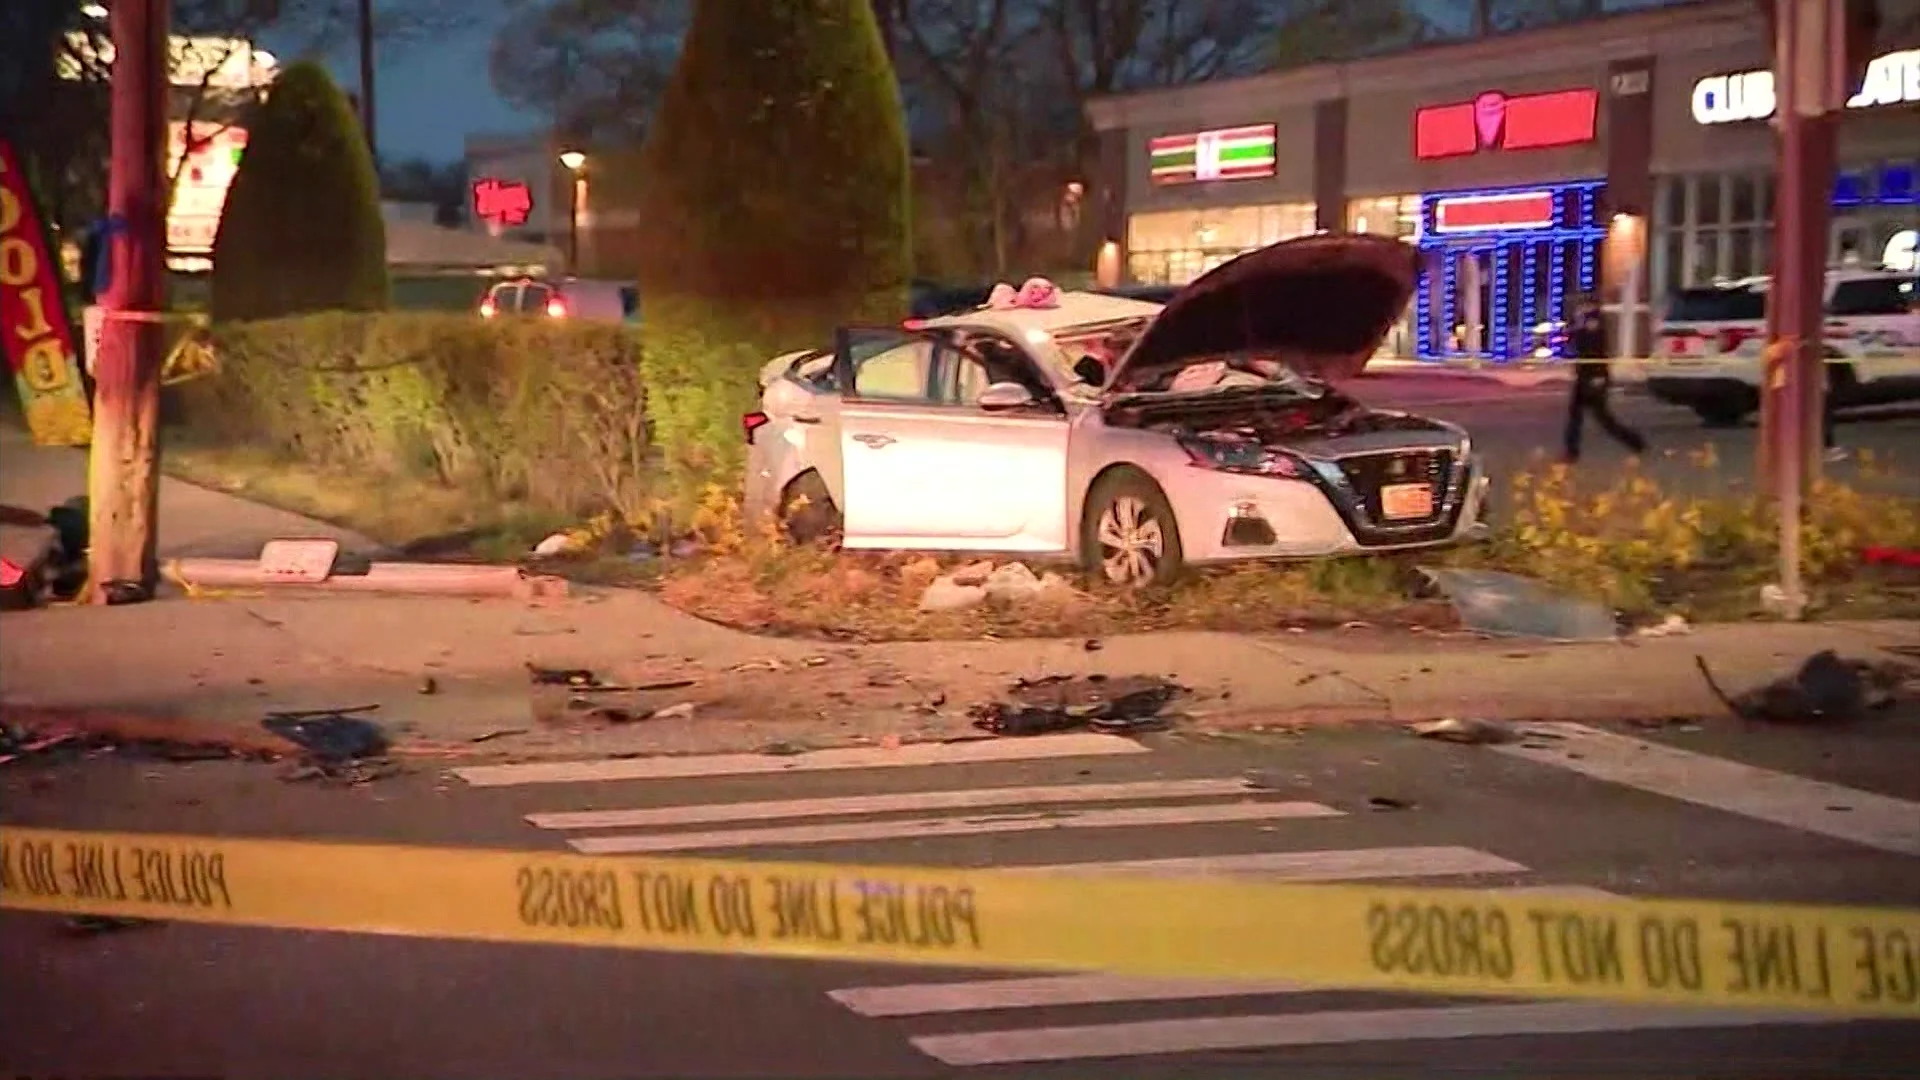 Town supervisor: 2 women injured in Massapequa crash; public safety vehicle stolen while trying to help